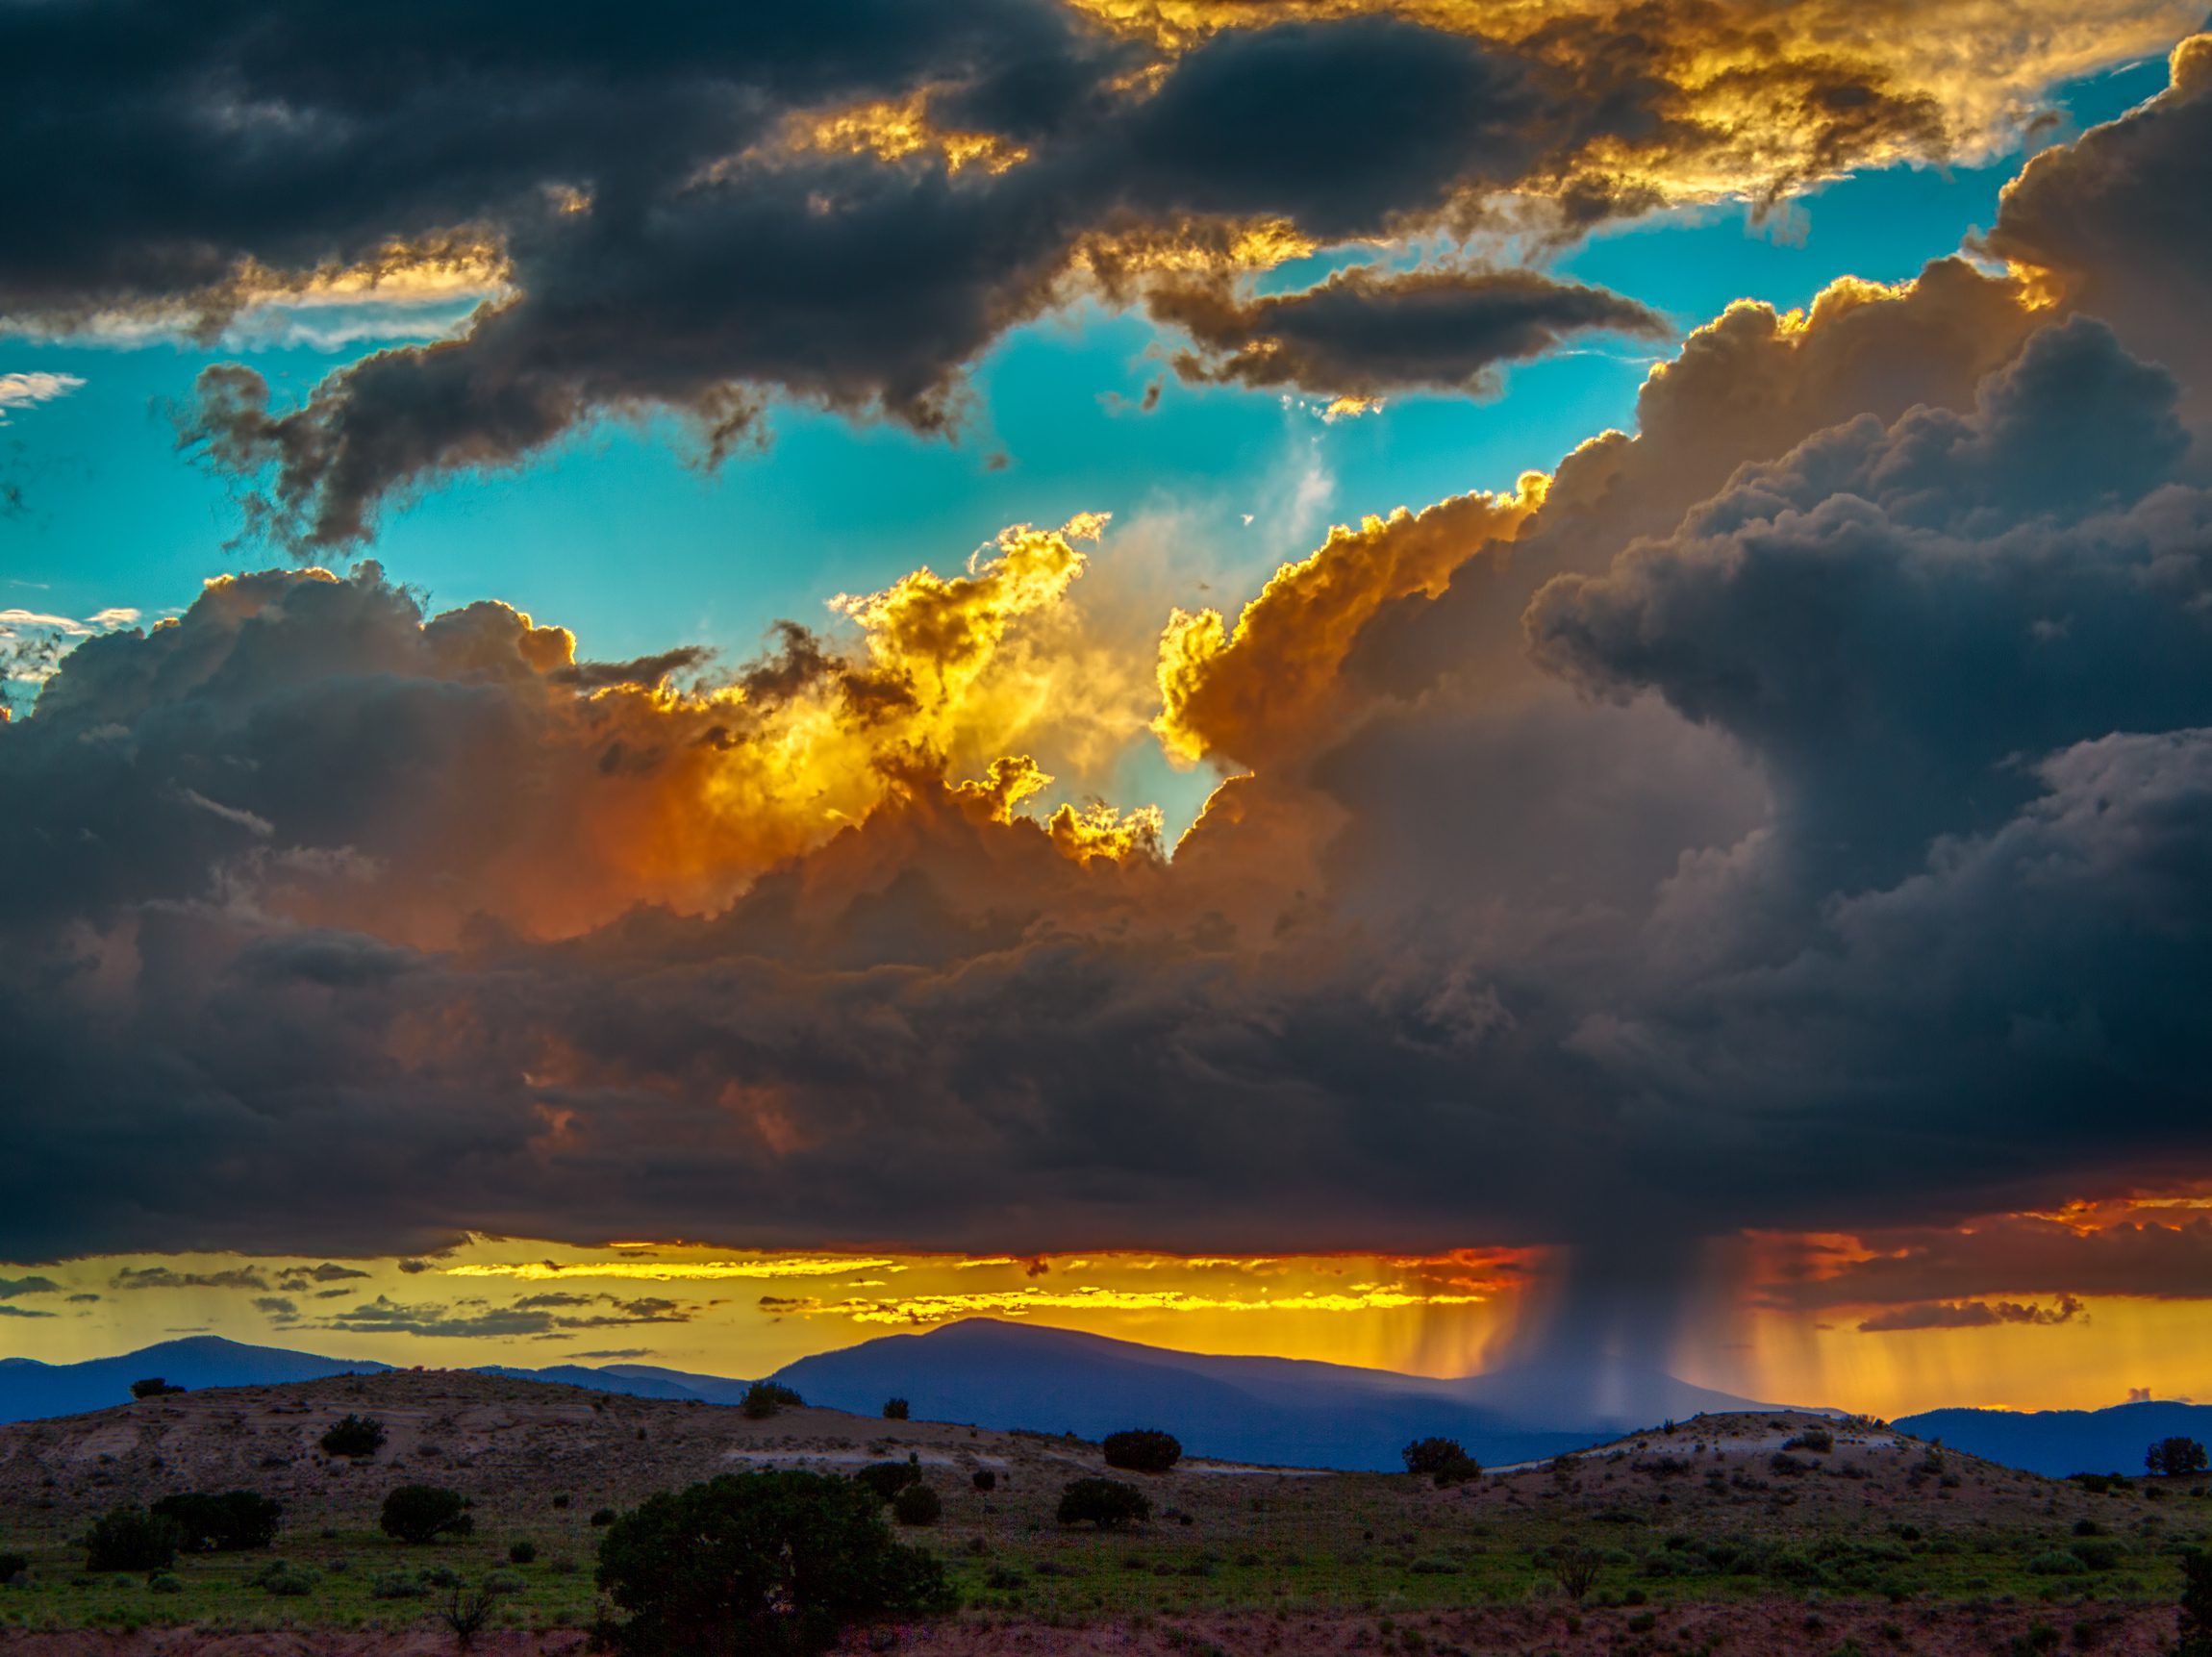 Thunderstorm dumping rain at sunset over the Jemez Mountains, New Mexico.